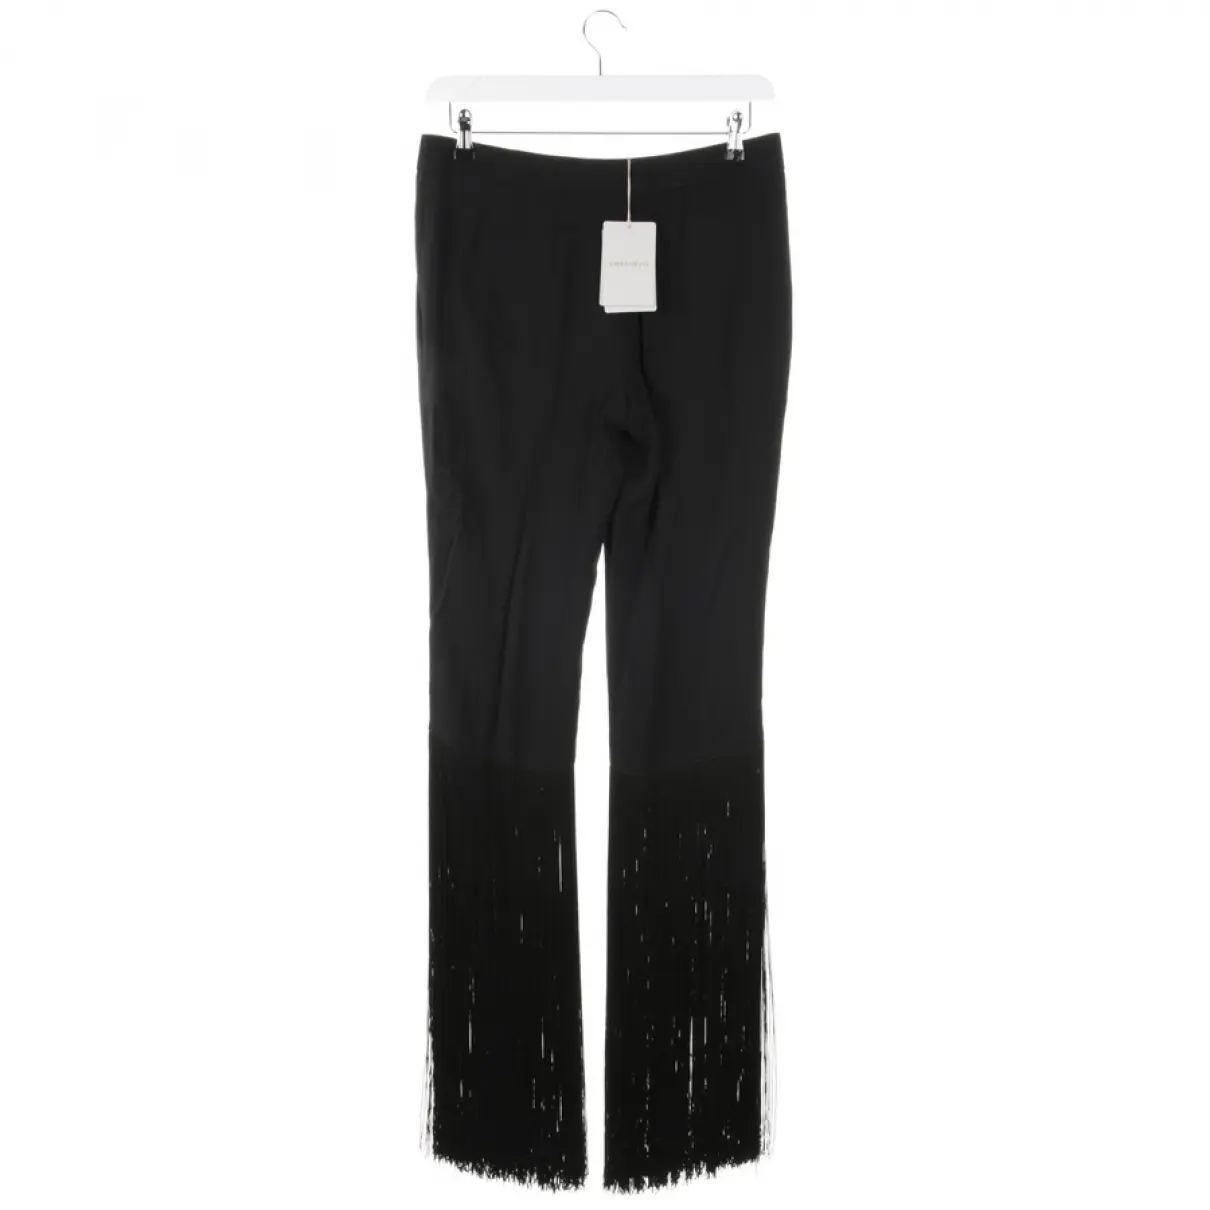 Buy Emilio Pucci Trousers online